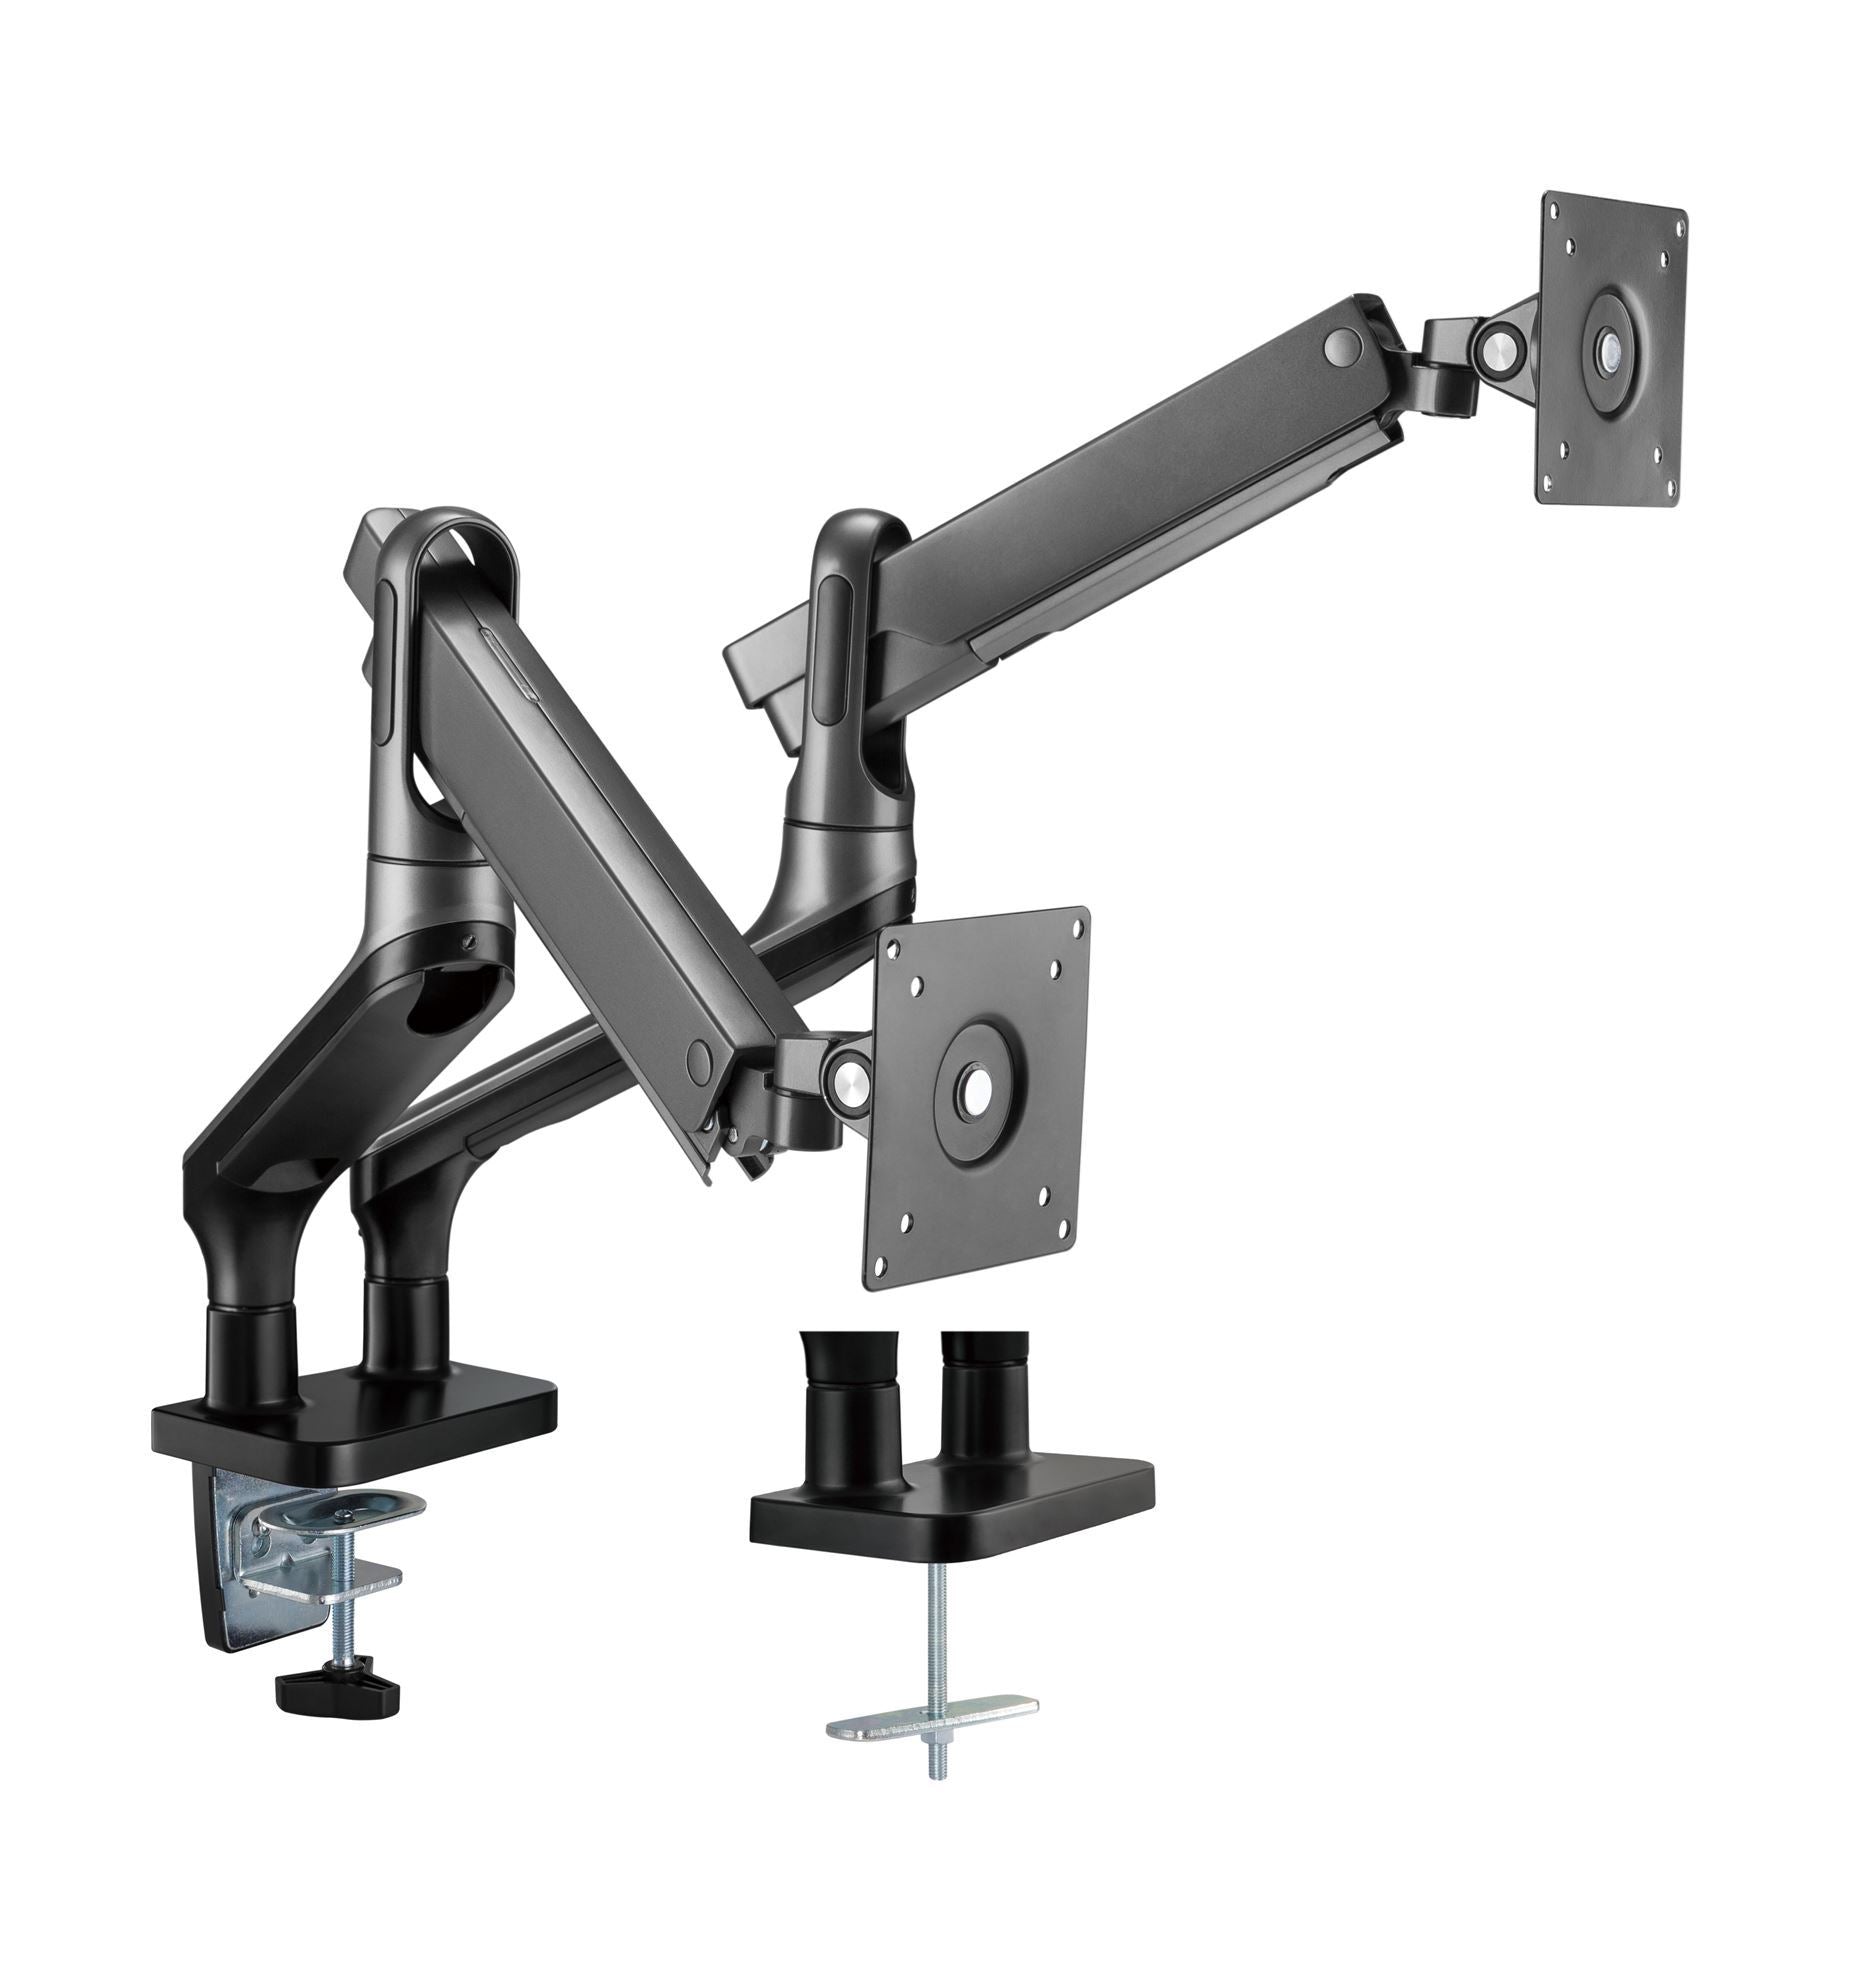 BRATECK 17''-32'' Premium Aluminium Dual Spring-Assisted Desk Mount Monitor Arm. Supports VESA up to 100x100